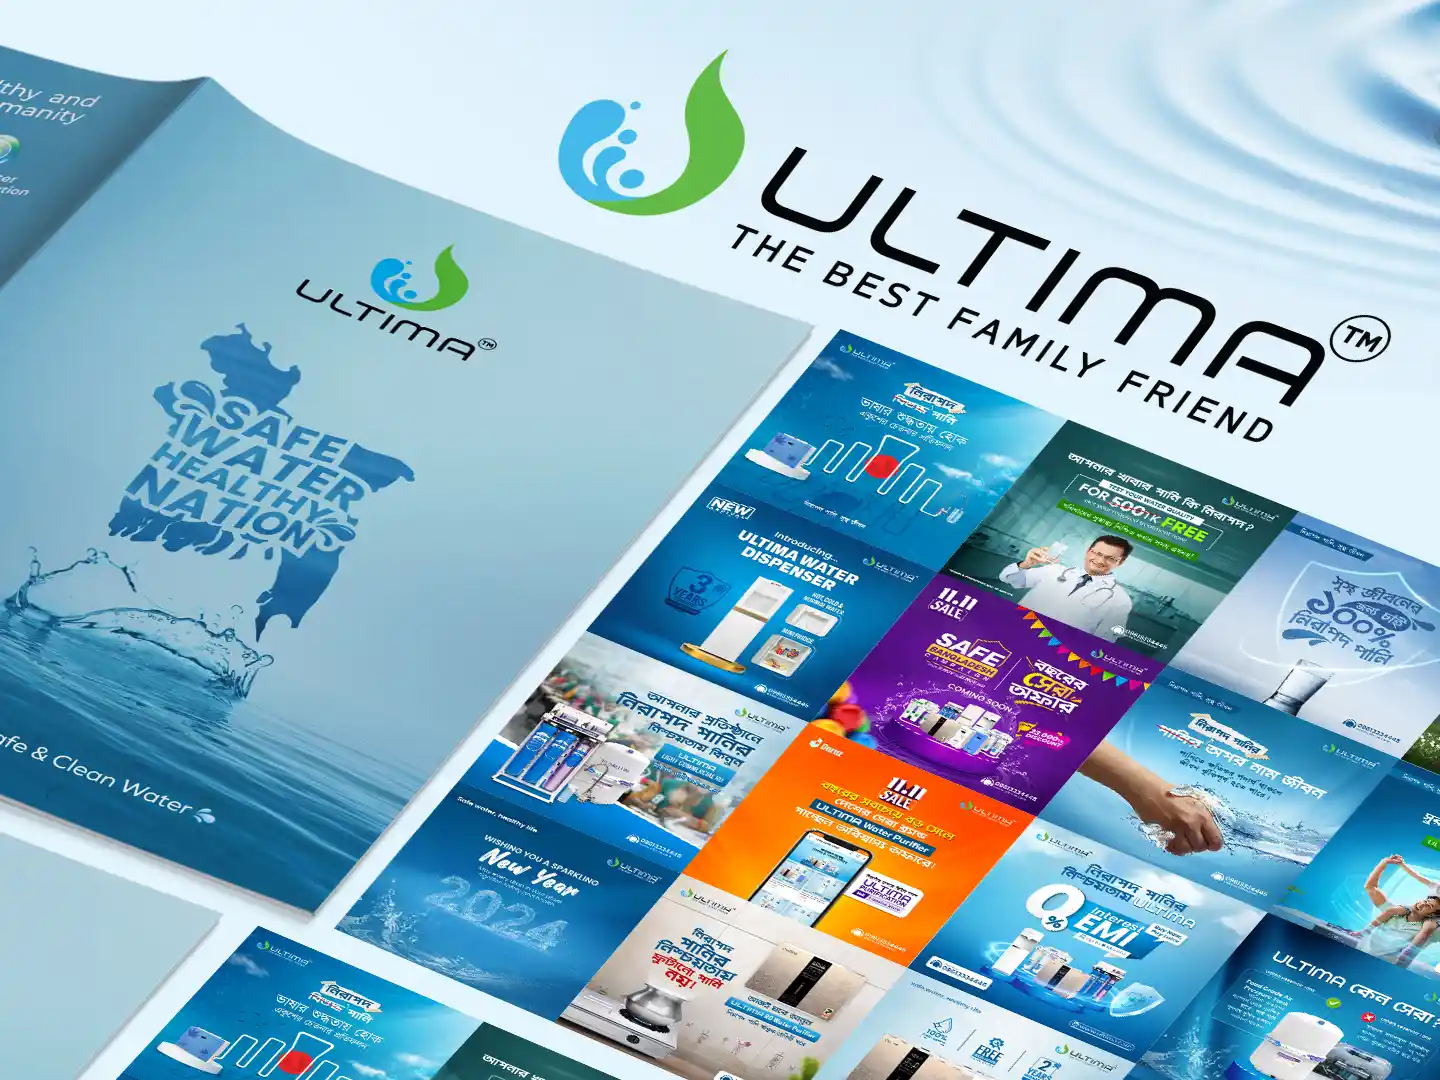 Perfecting Projects with Ultima Bangladesh